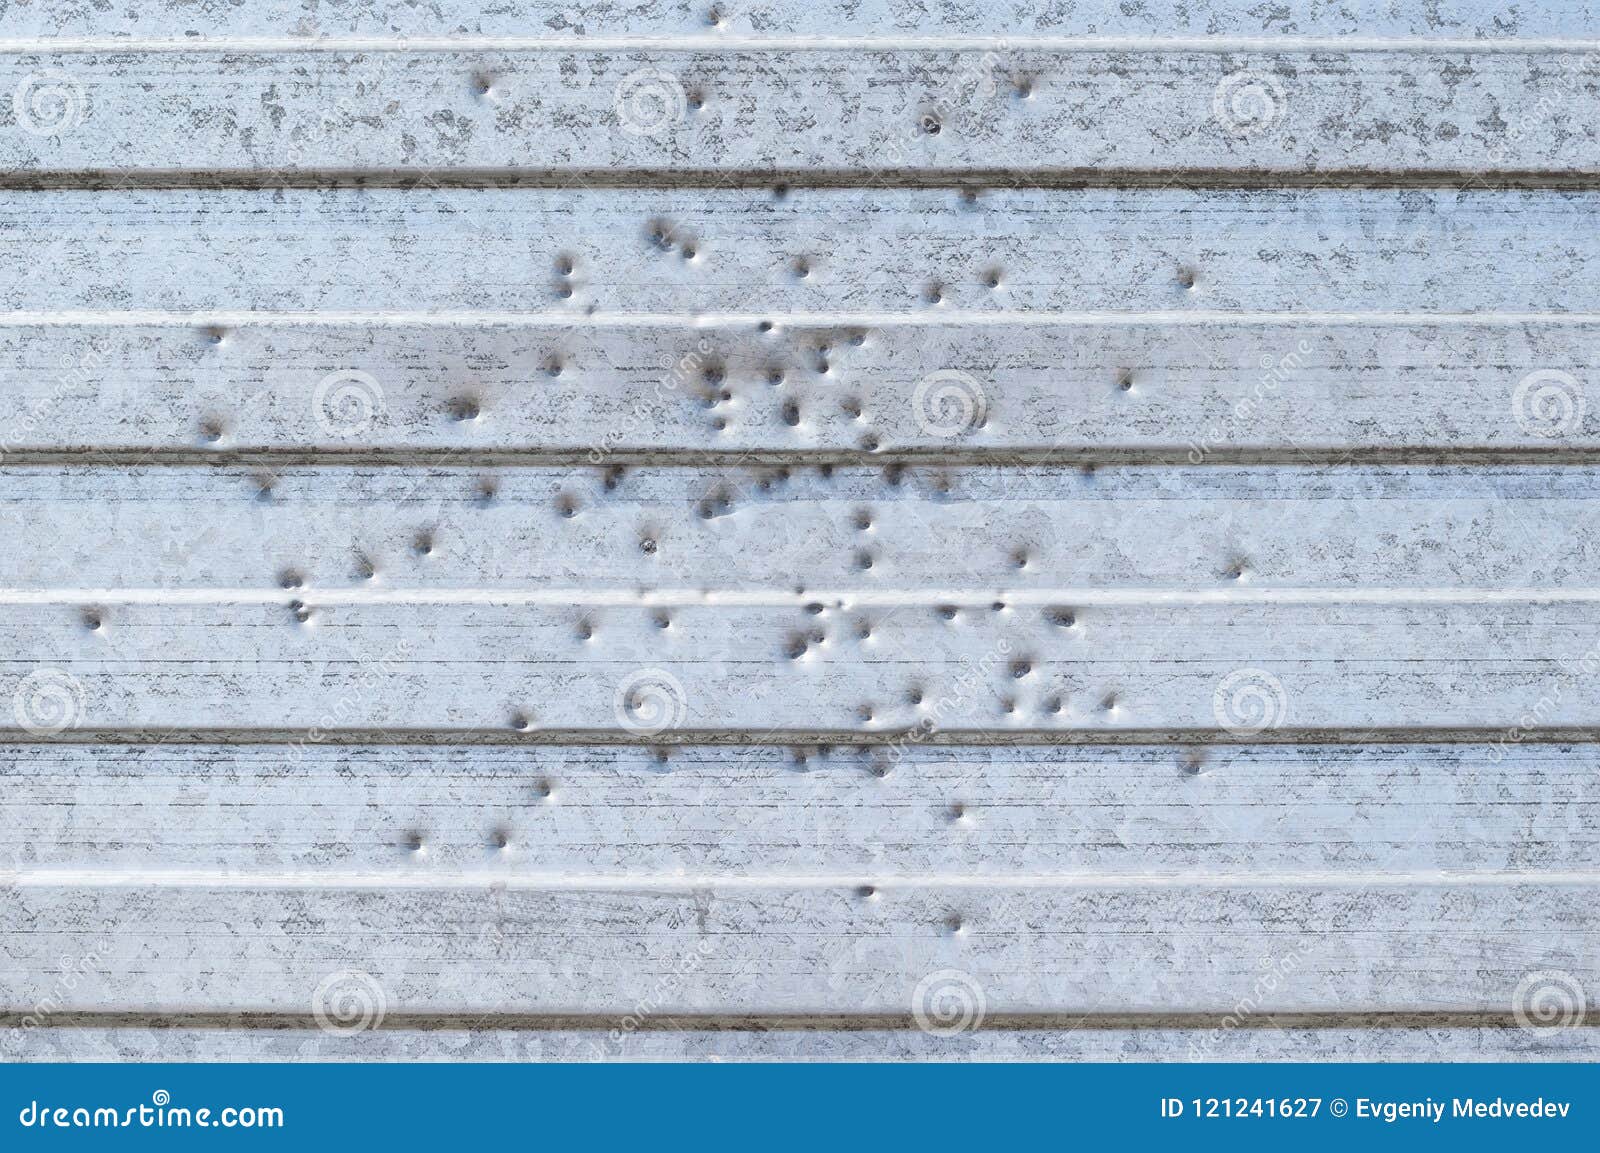 Wallpaper of Metal Holey Fence with Holes from Gun Shots Stock Image -  Image of grit, color: 121241627